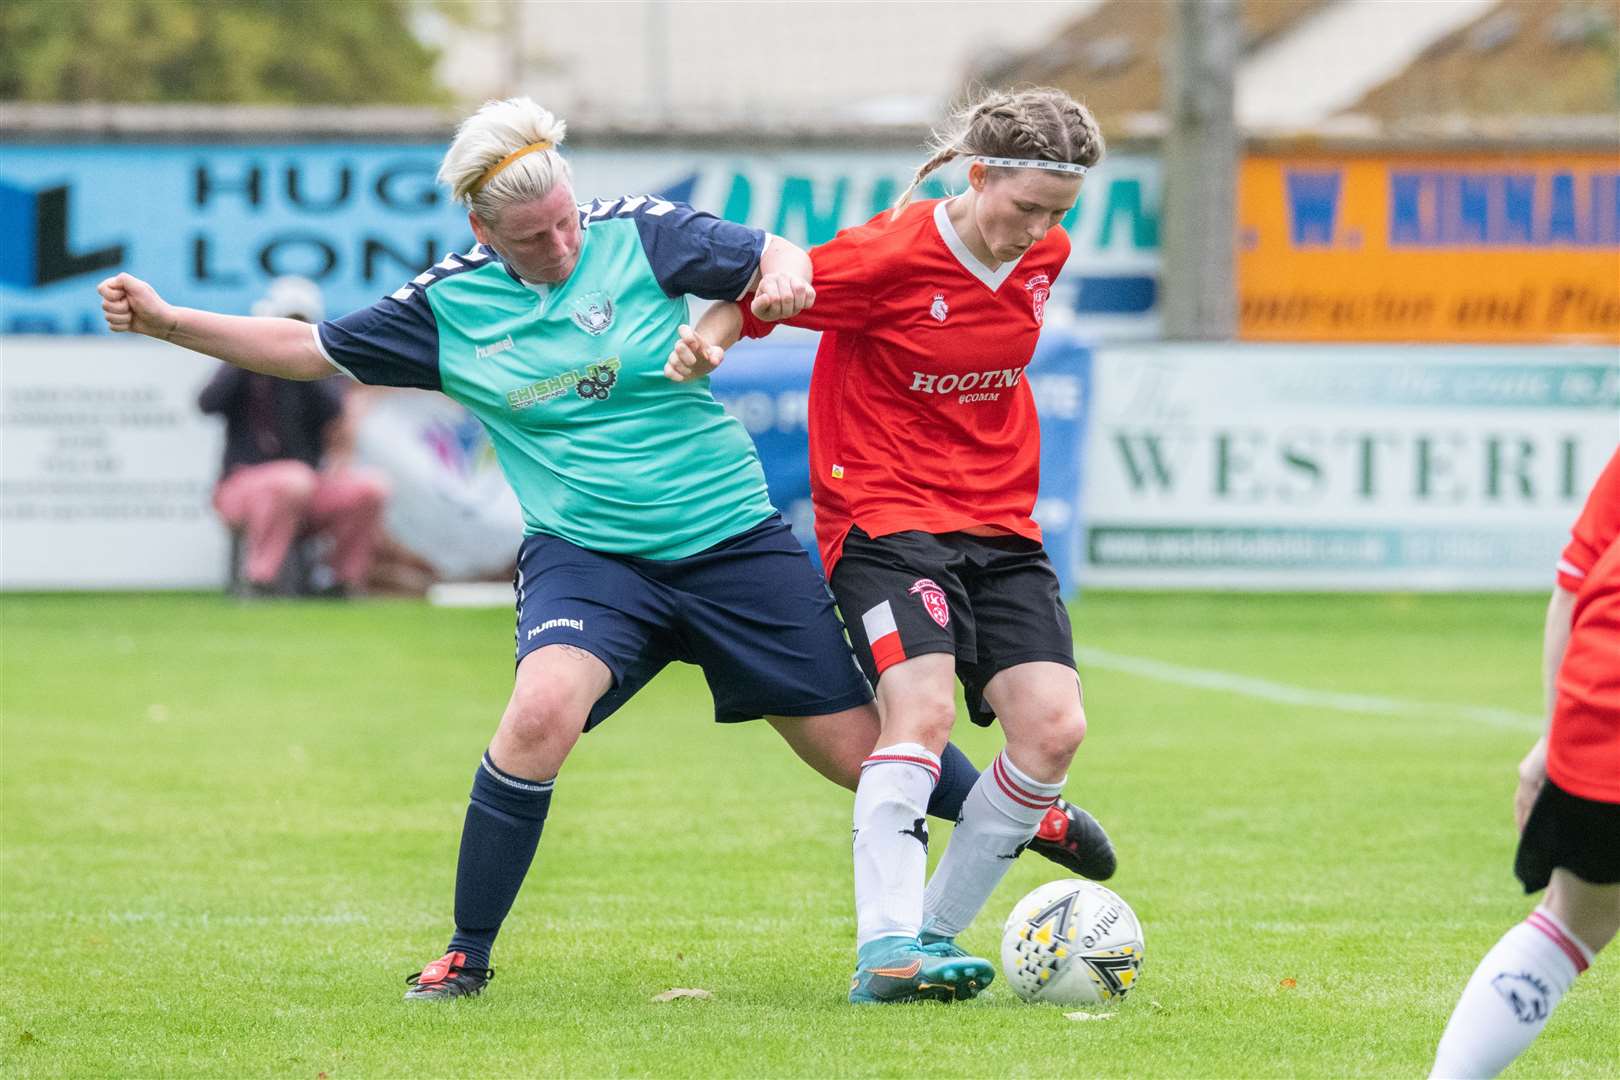 Buckie's Alicia Paterson tries to dispossess Carly Erridge. Picture: Daniel Forsyth